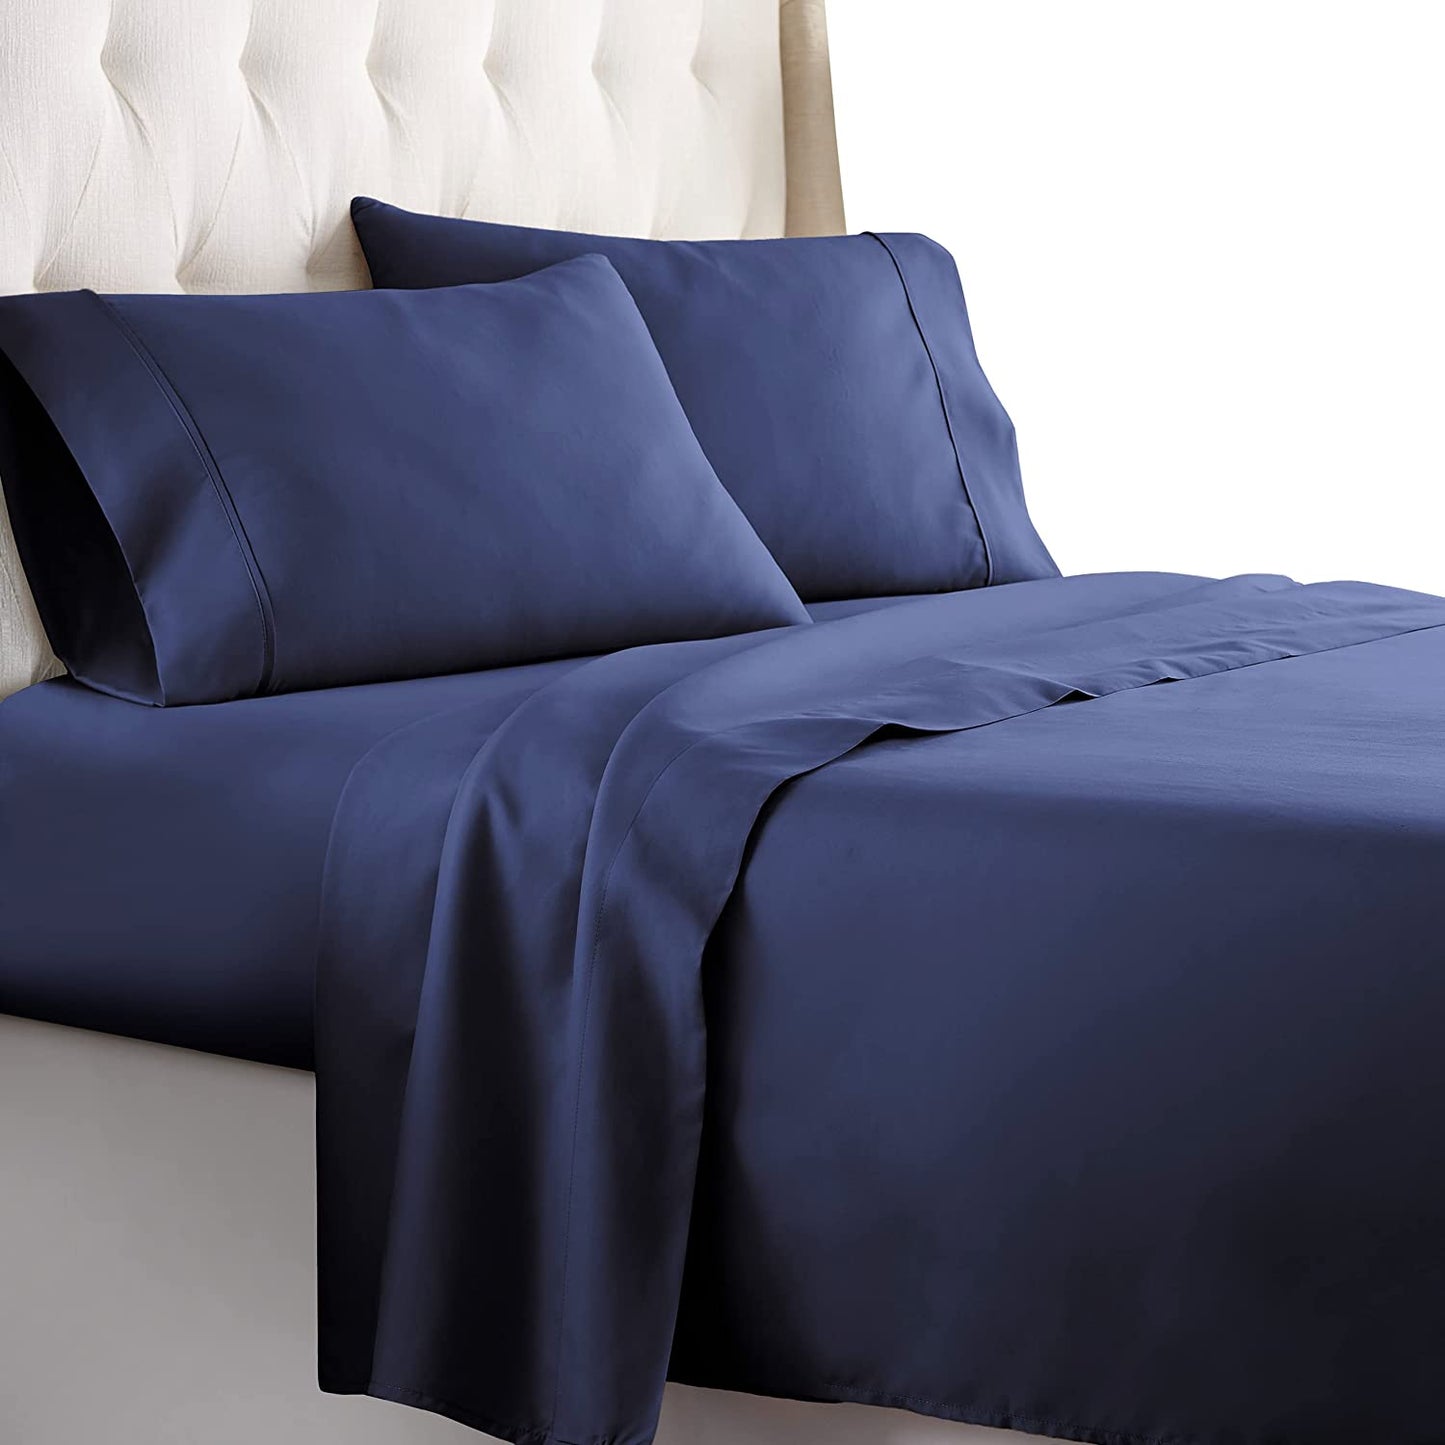 16 Inch Pocket Fitted Sheet Navy Blue Egyptian Cotton at-EgyptianHomeLinens.com